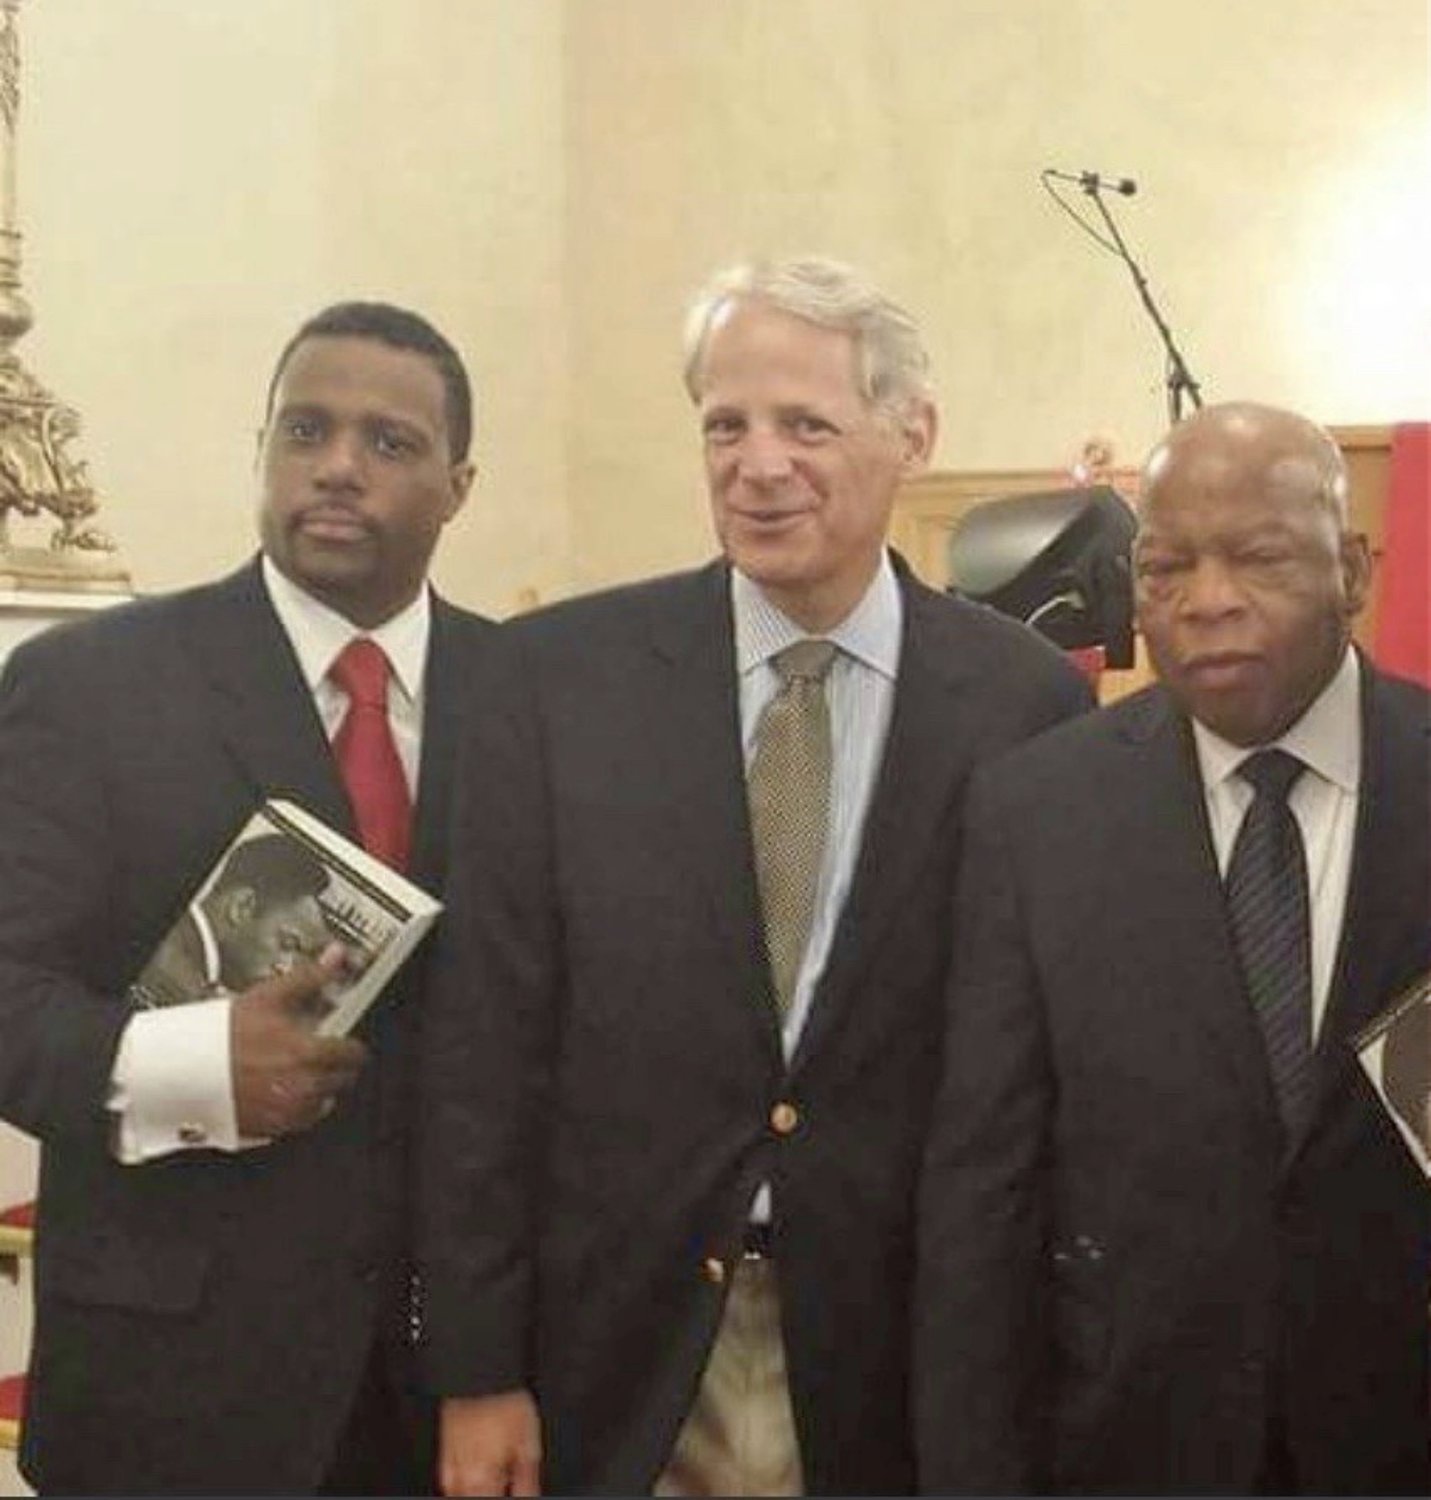 The Rev. Roger Williams, left, former U.S. Rep. Steve Israel and Rep. John Lewis at an event at First Baptist Church of Glen Cove in 2014.